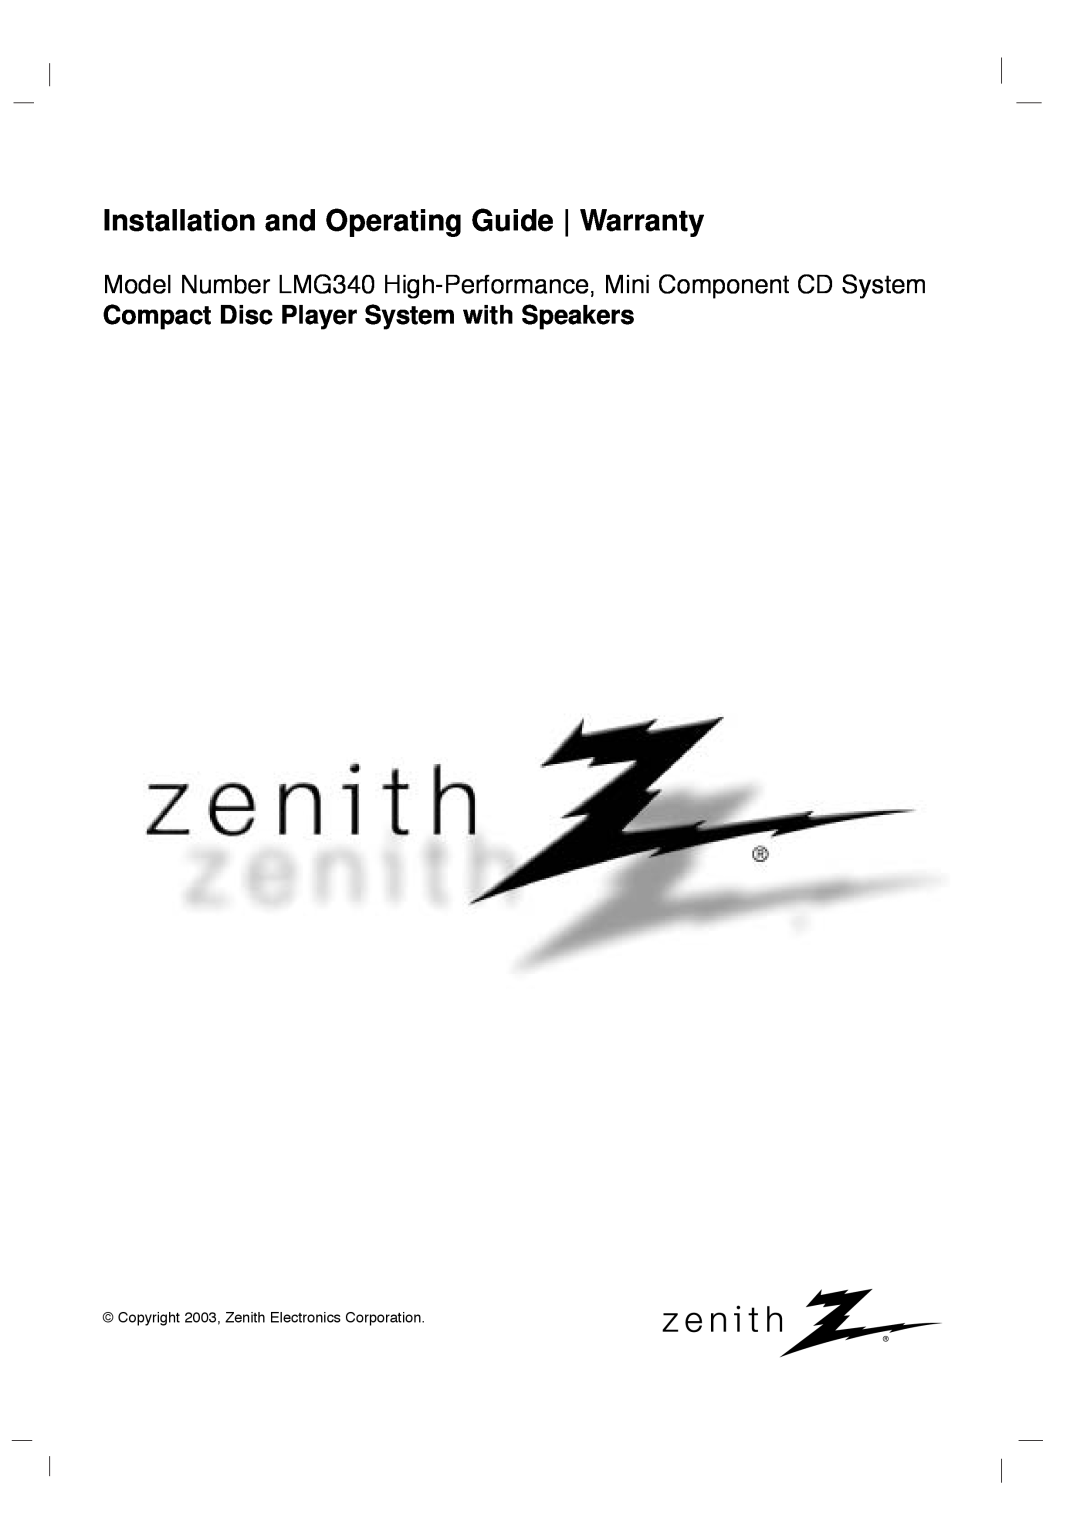 Zenith LMG340 warranty Compact Disc Player System with Speakers, Installation and Operating Guide Warranty 